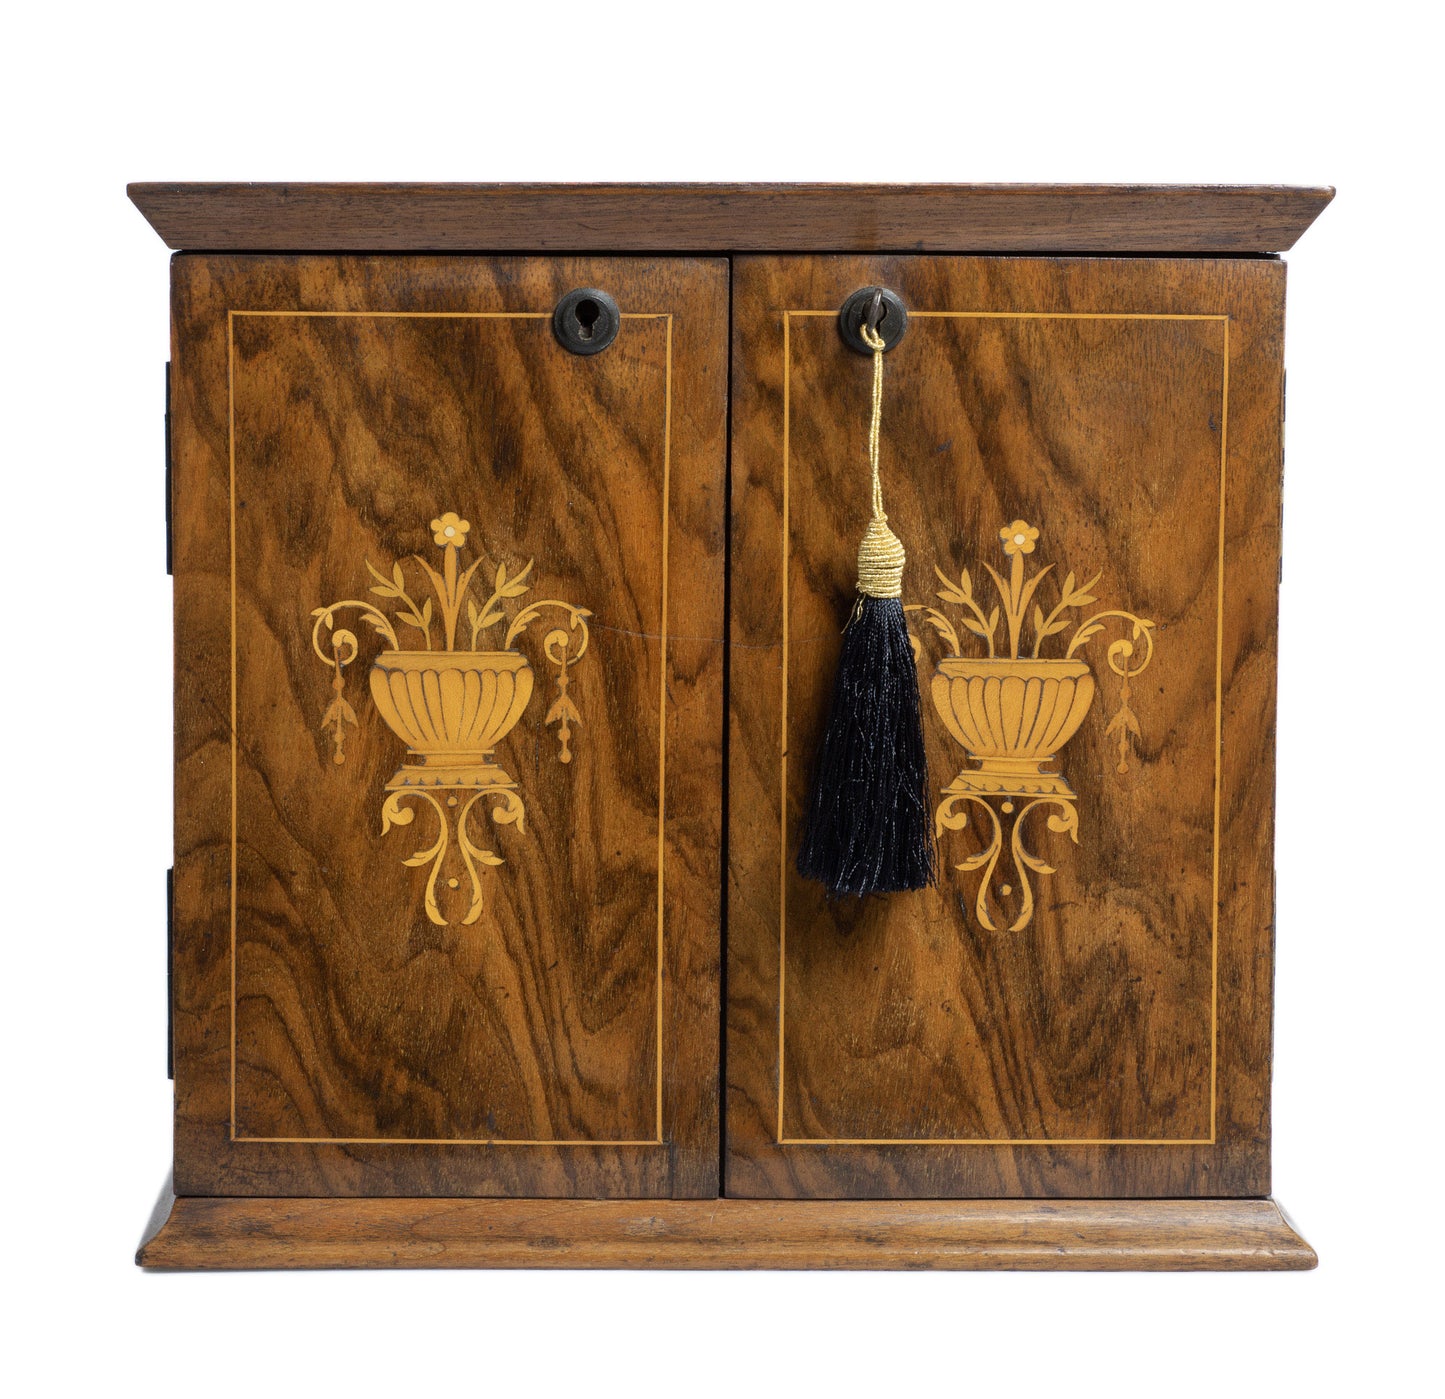 Antique Walnut Table Top Cabinet Box - Internal Drawers & Inlaid Adams Detailing (Code 2758)